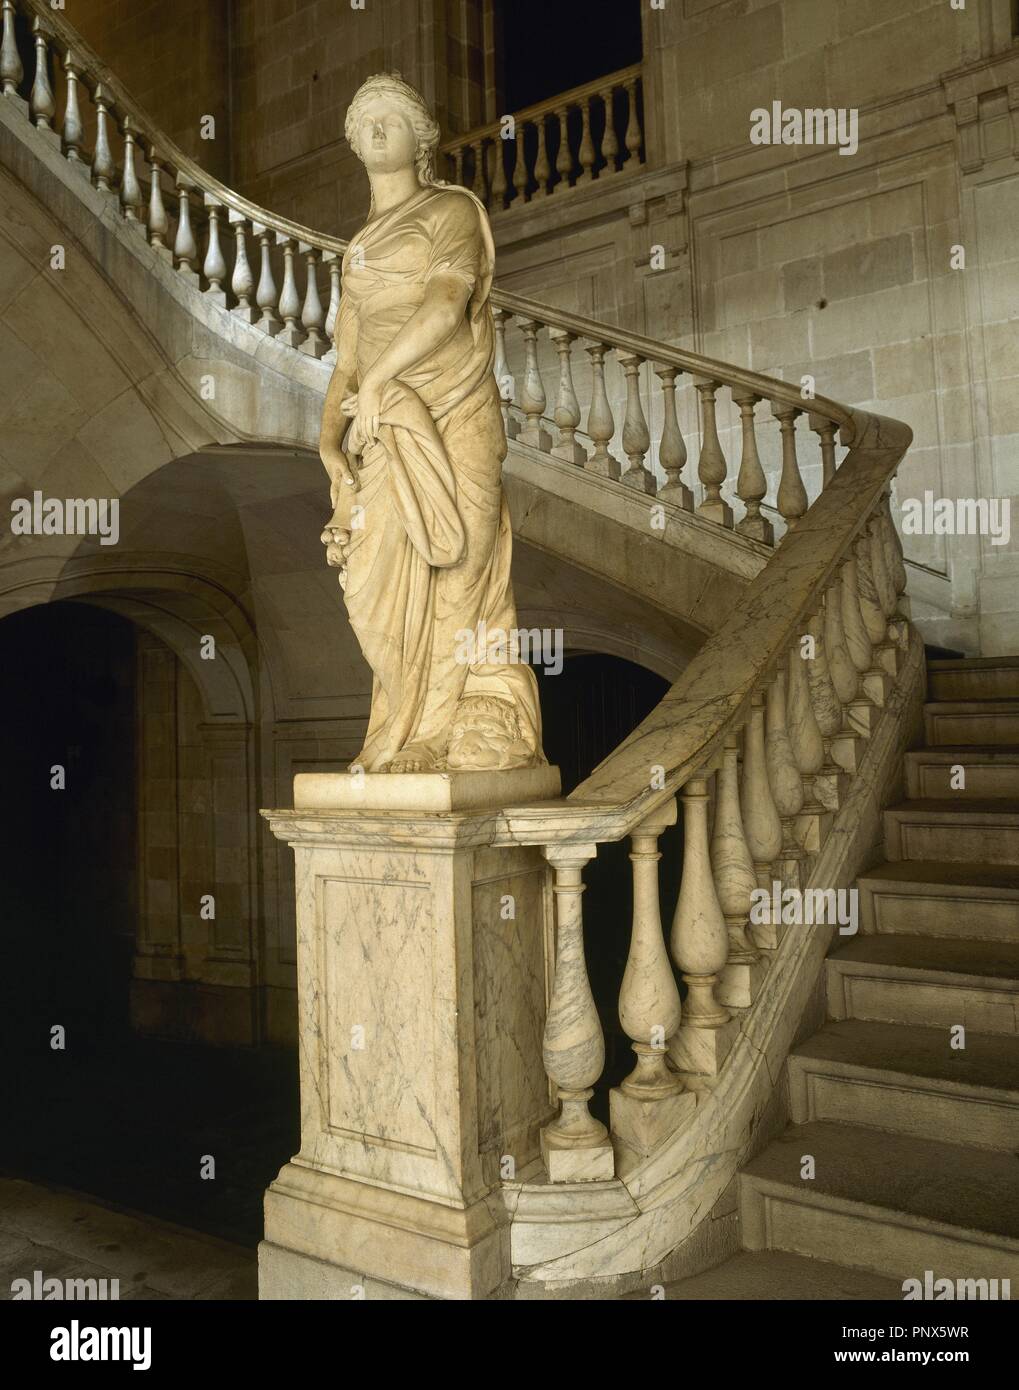 The Commerce. 1802. Allegorical sculpture by Salvador Gurri Corominas (1749-1819) at the foot of the staircase of honor at Casa Llotja de Mar. Marble. Barcelona. Catalonia. Spain. Stock Photo